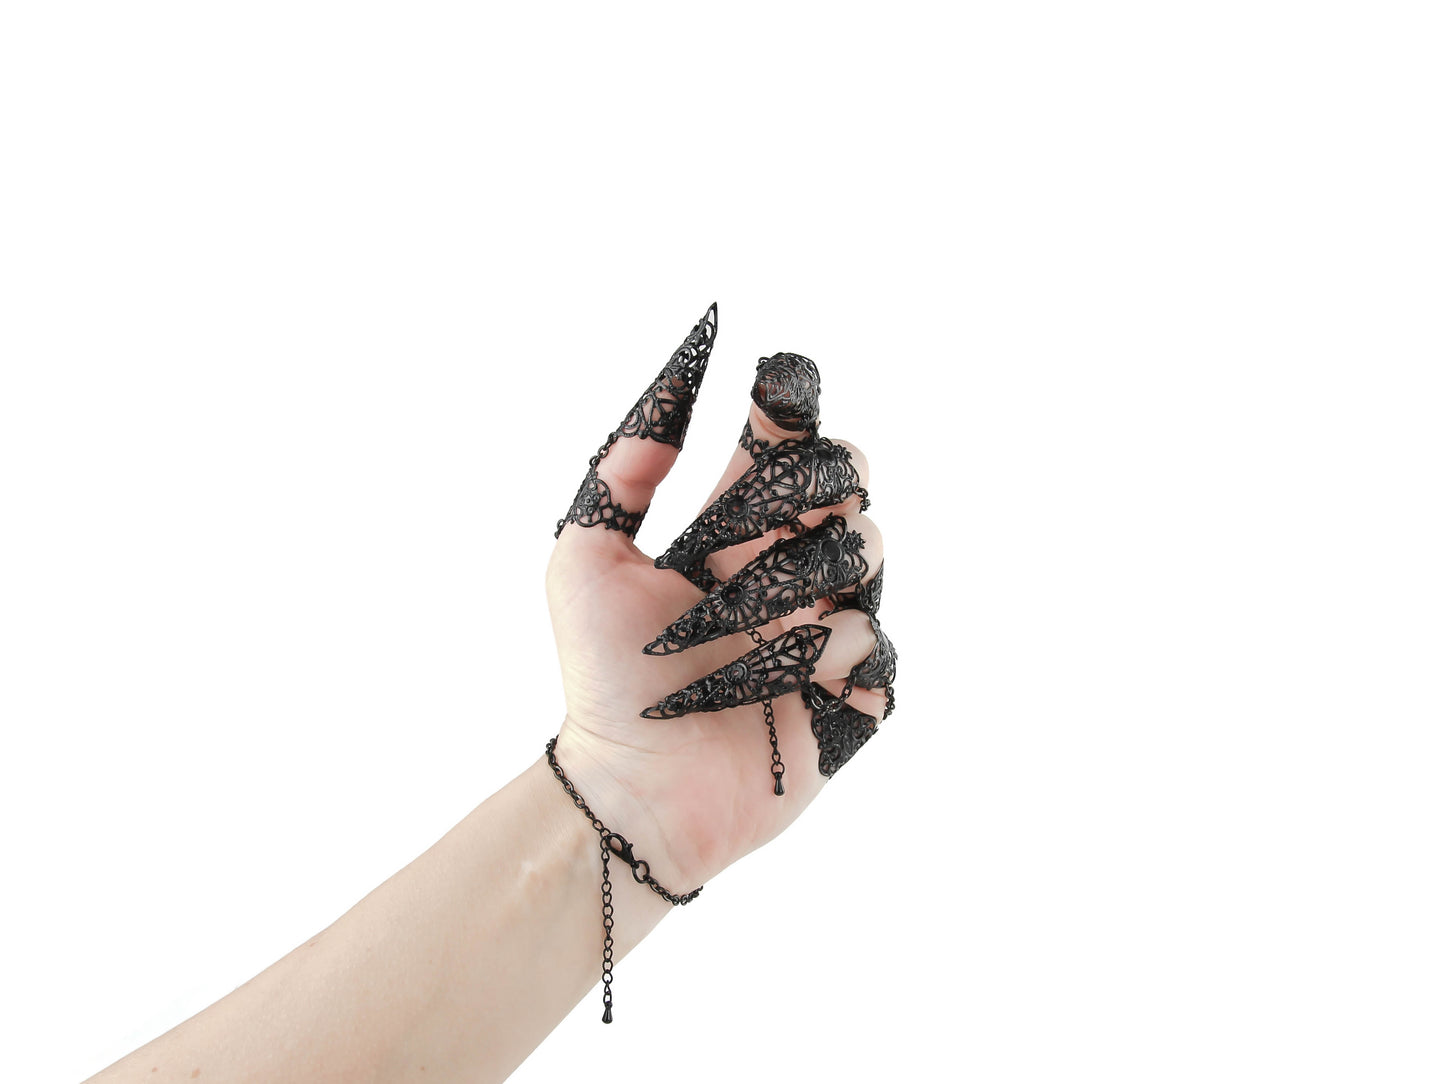 An ornate full hand black metal glove with claw rings from Myril Jewels encapsulates a neo-goth aesthetic. This exquisite piece is ideal for anyone seeking bold, dark-avantgarde jewelry, perfectly suited for gothic, punk, or Whimsigoth styles and makes an unforgettable goth girlfriend gift.